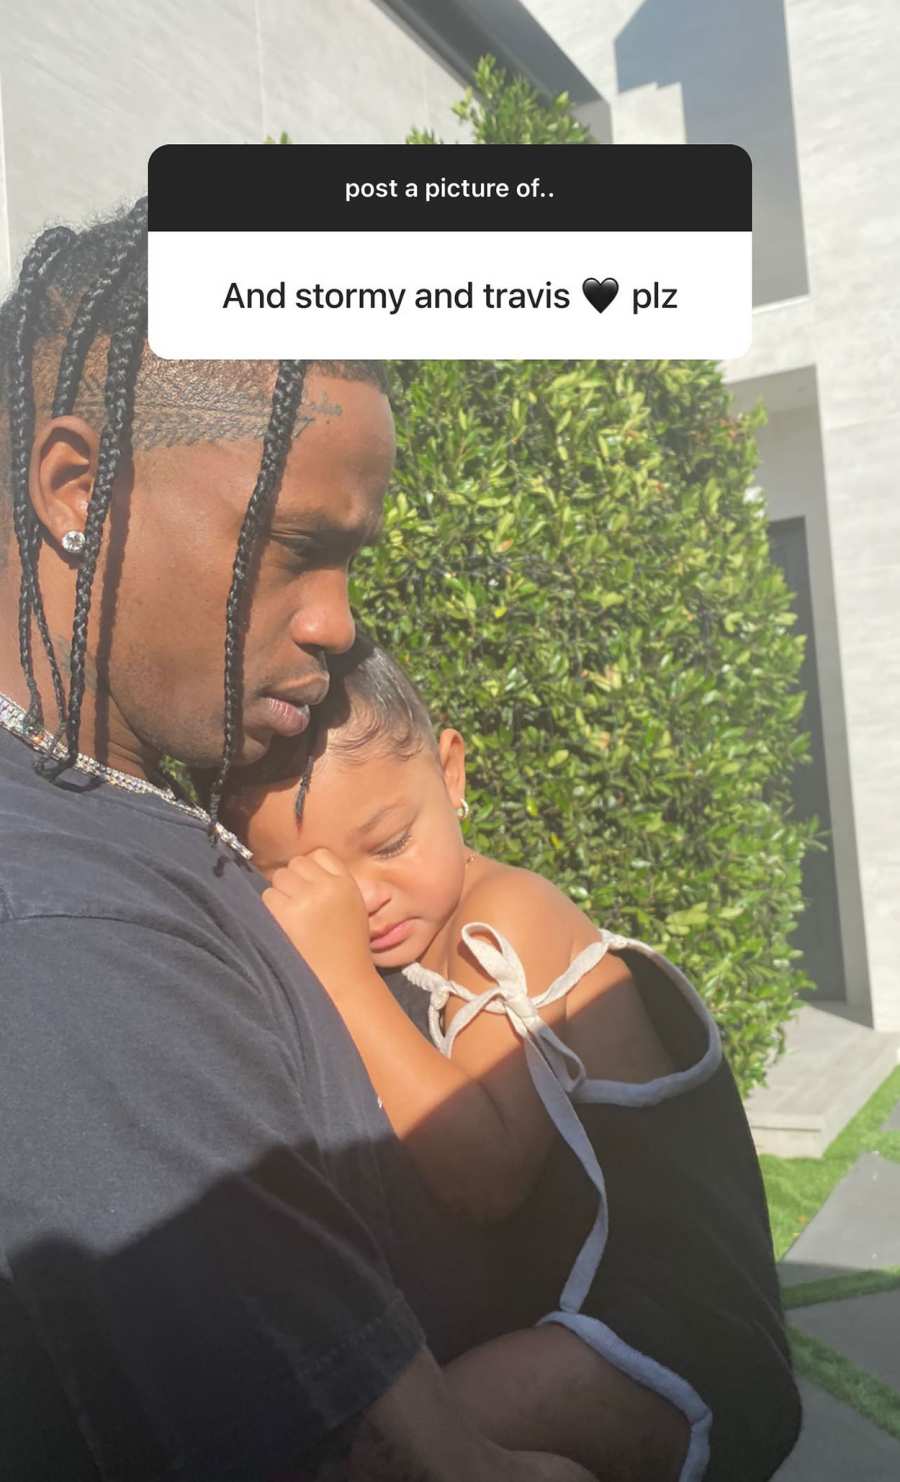 Proud Mama! Kylie Jenner Shares Unseen Pics of Pregnancy and Daughter Stormi